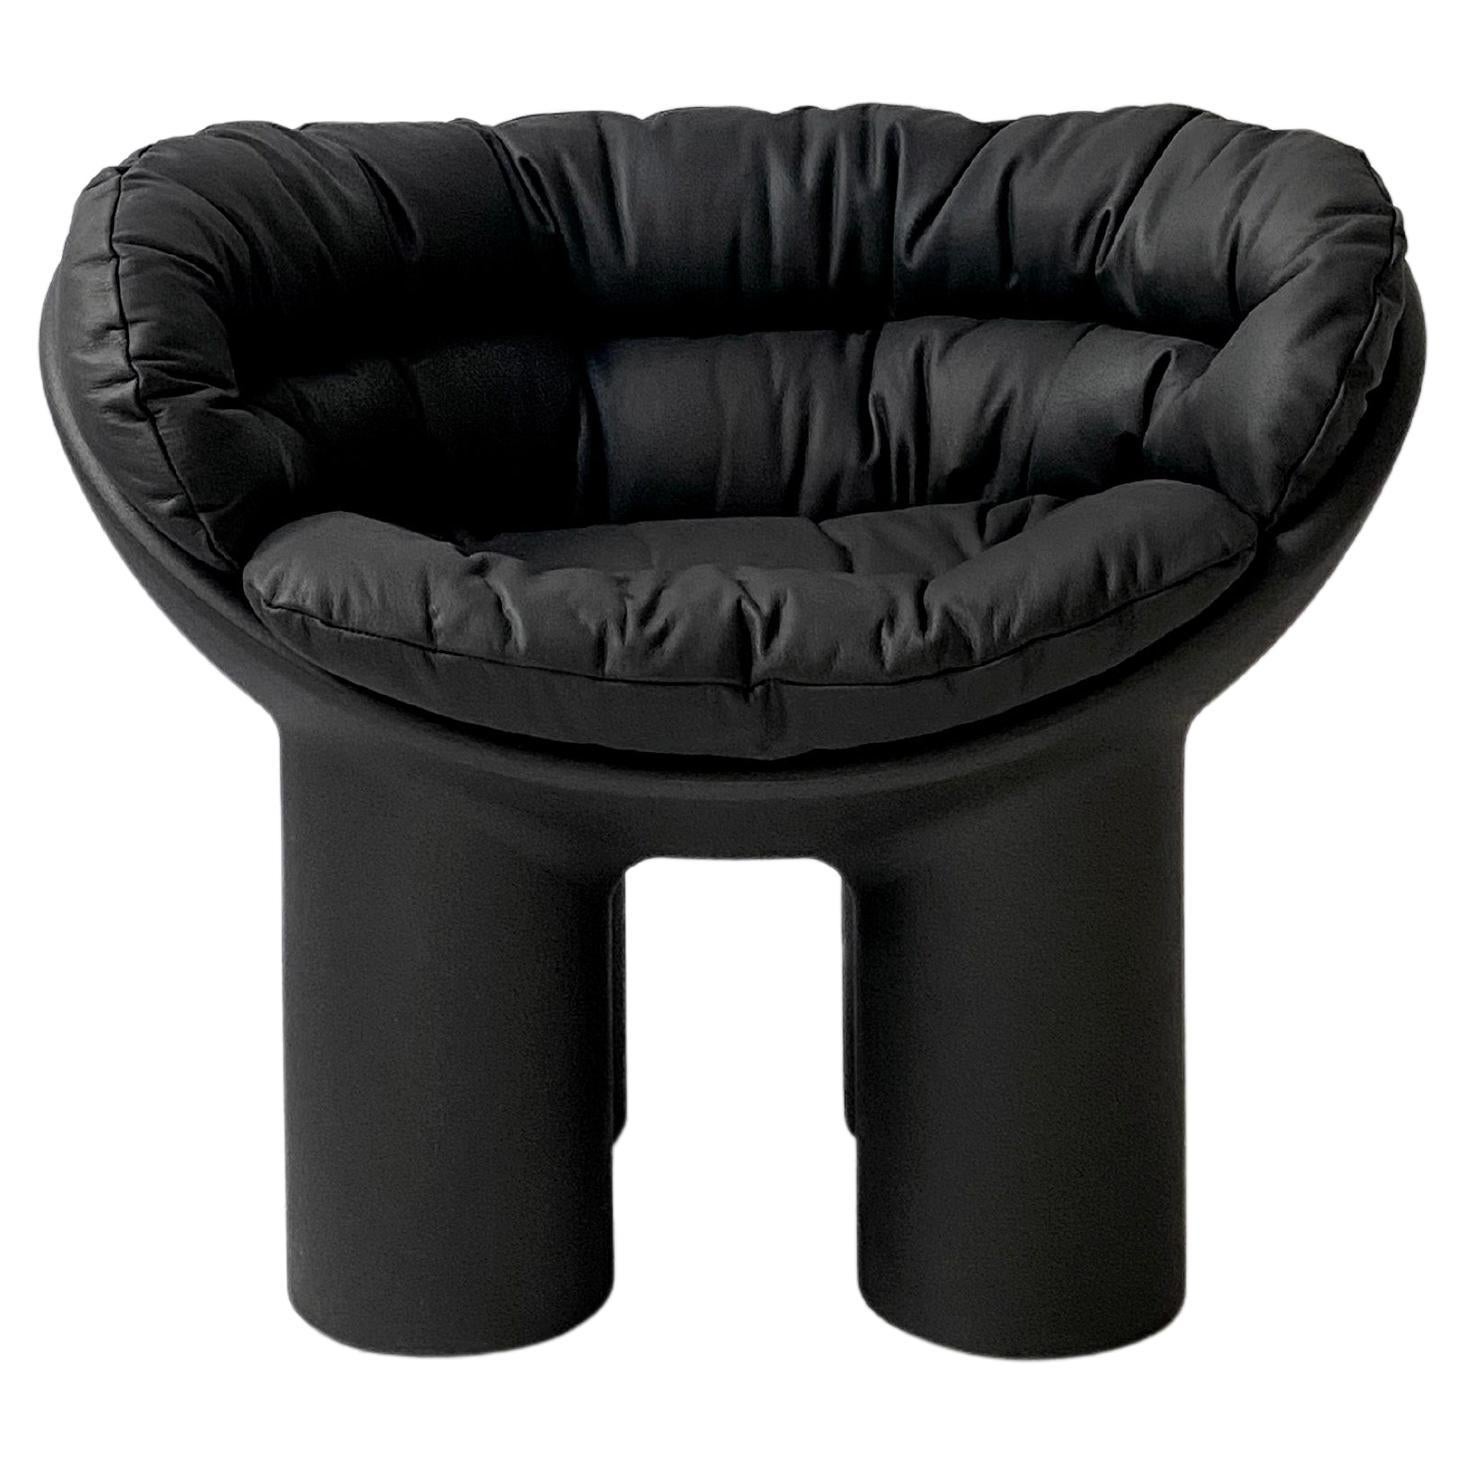 Roly Poly Armchair in Black by Faye Toogood with Aniline Leather cushions